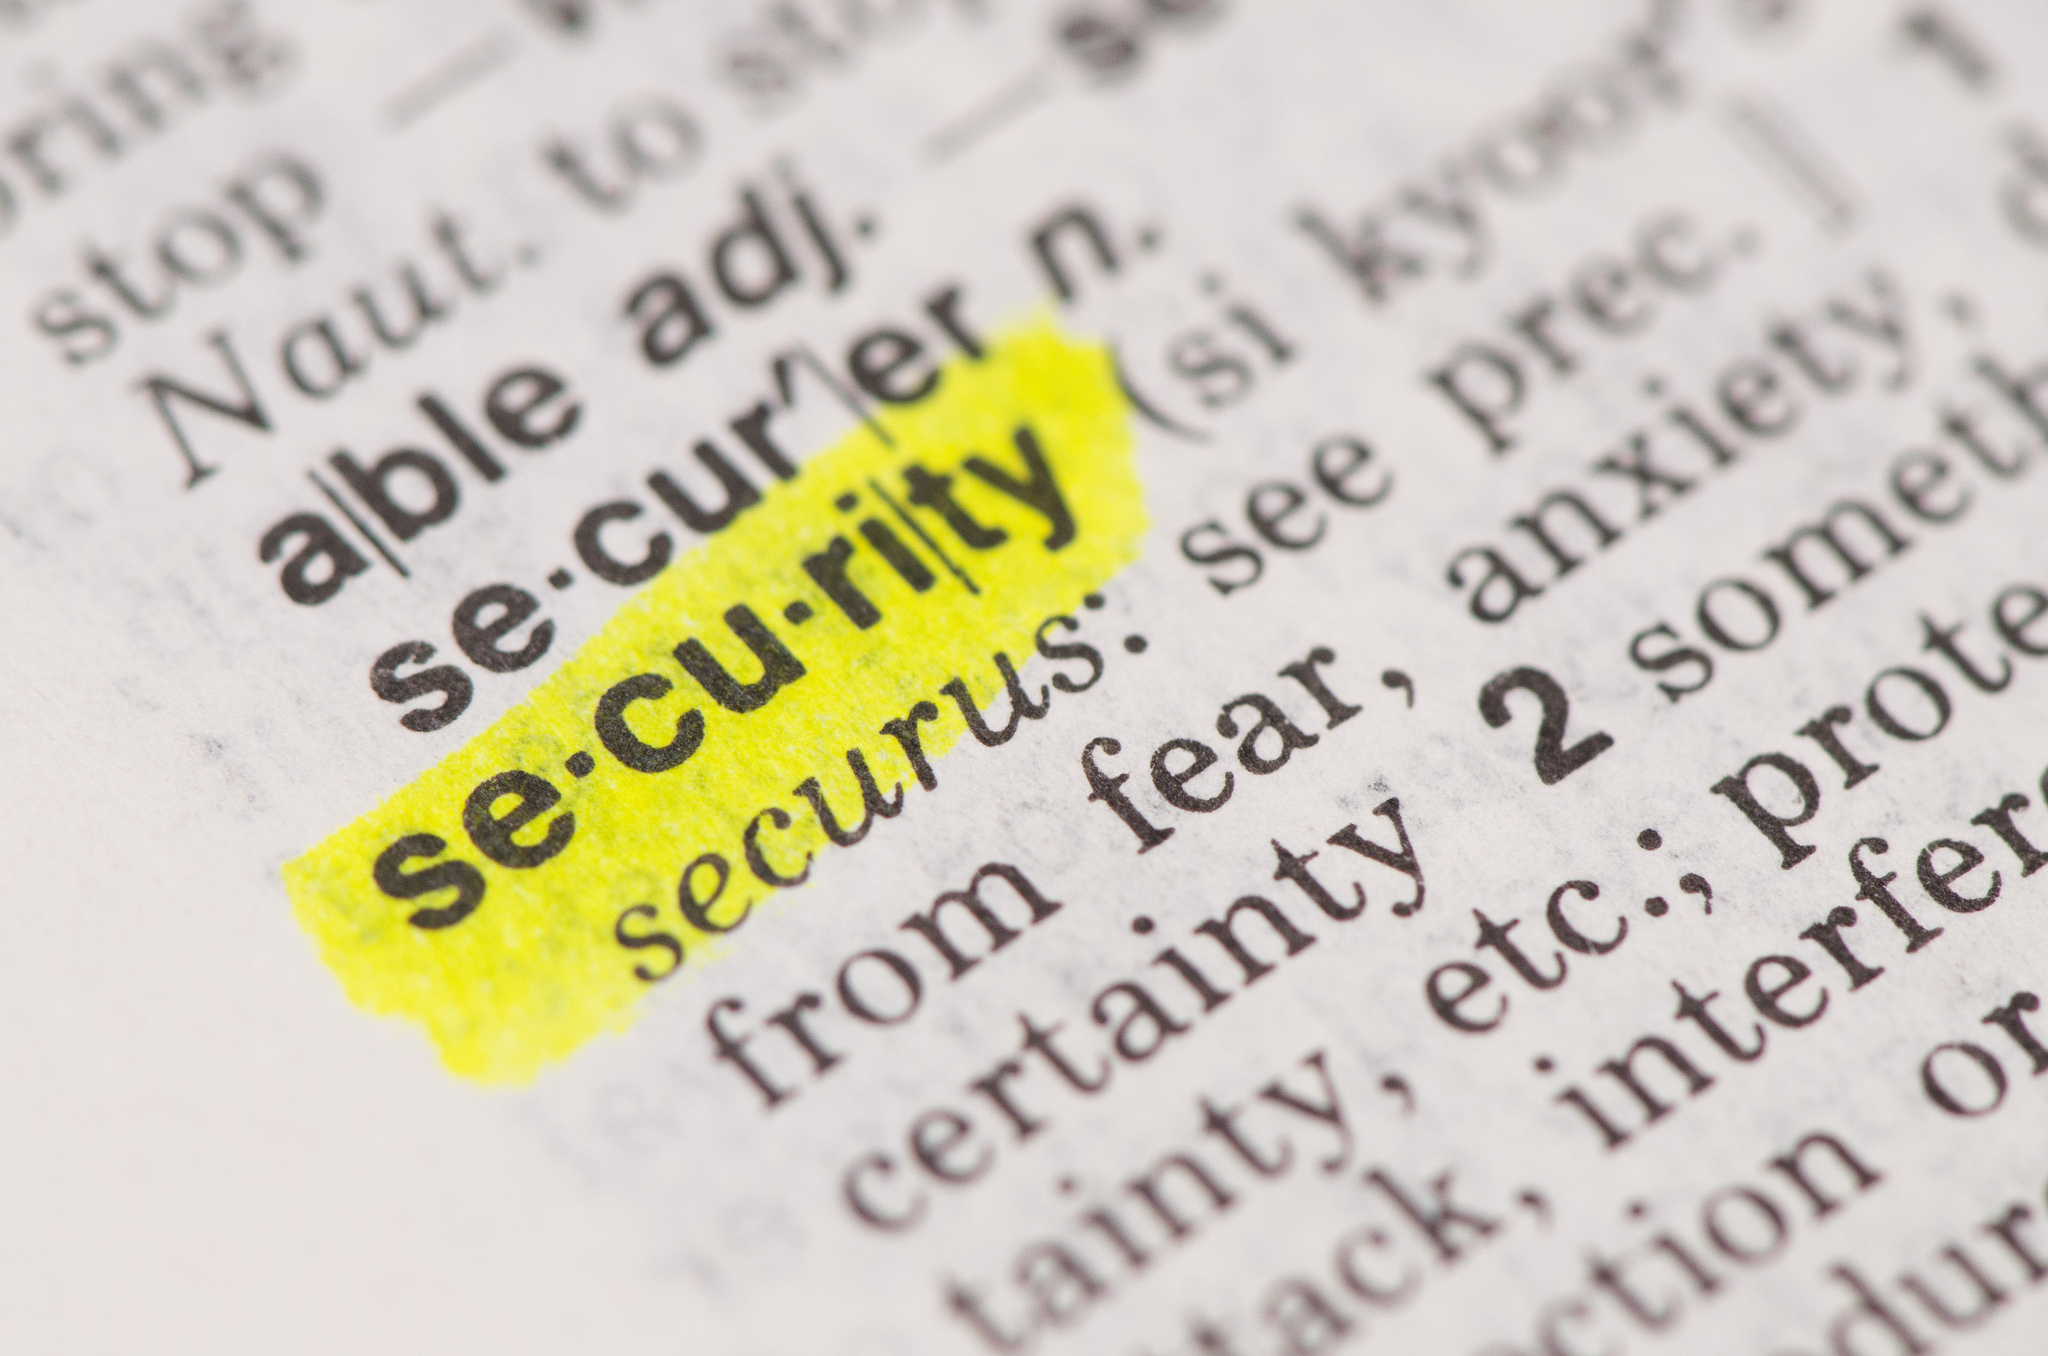 What Practical Steps Can I Take to Get Started with Security Intelligence?